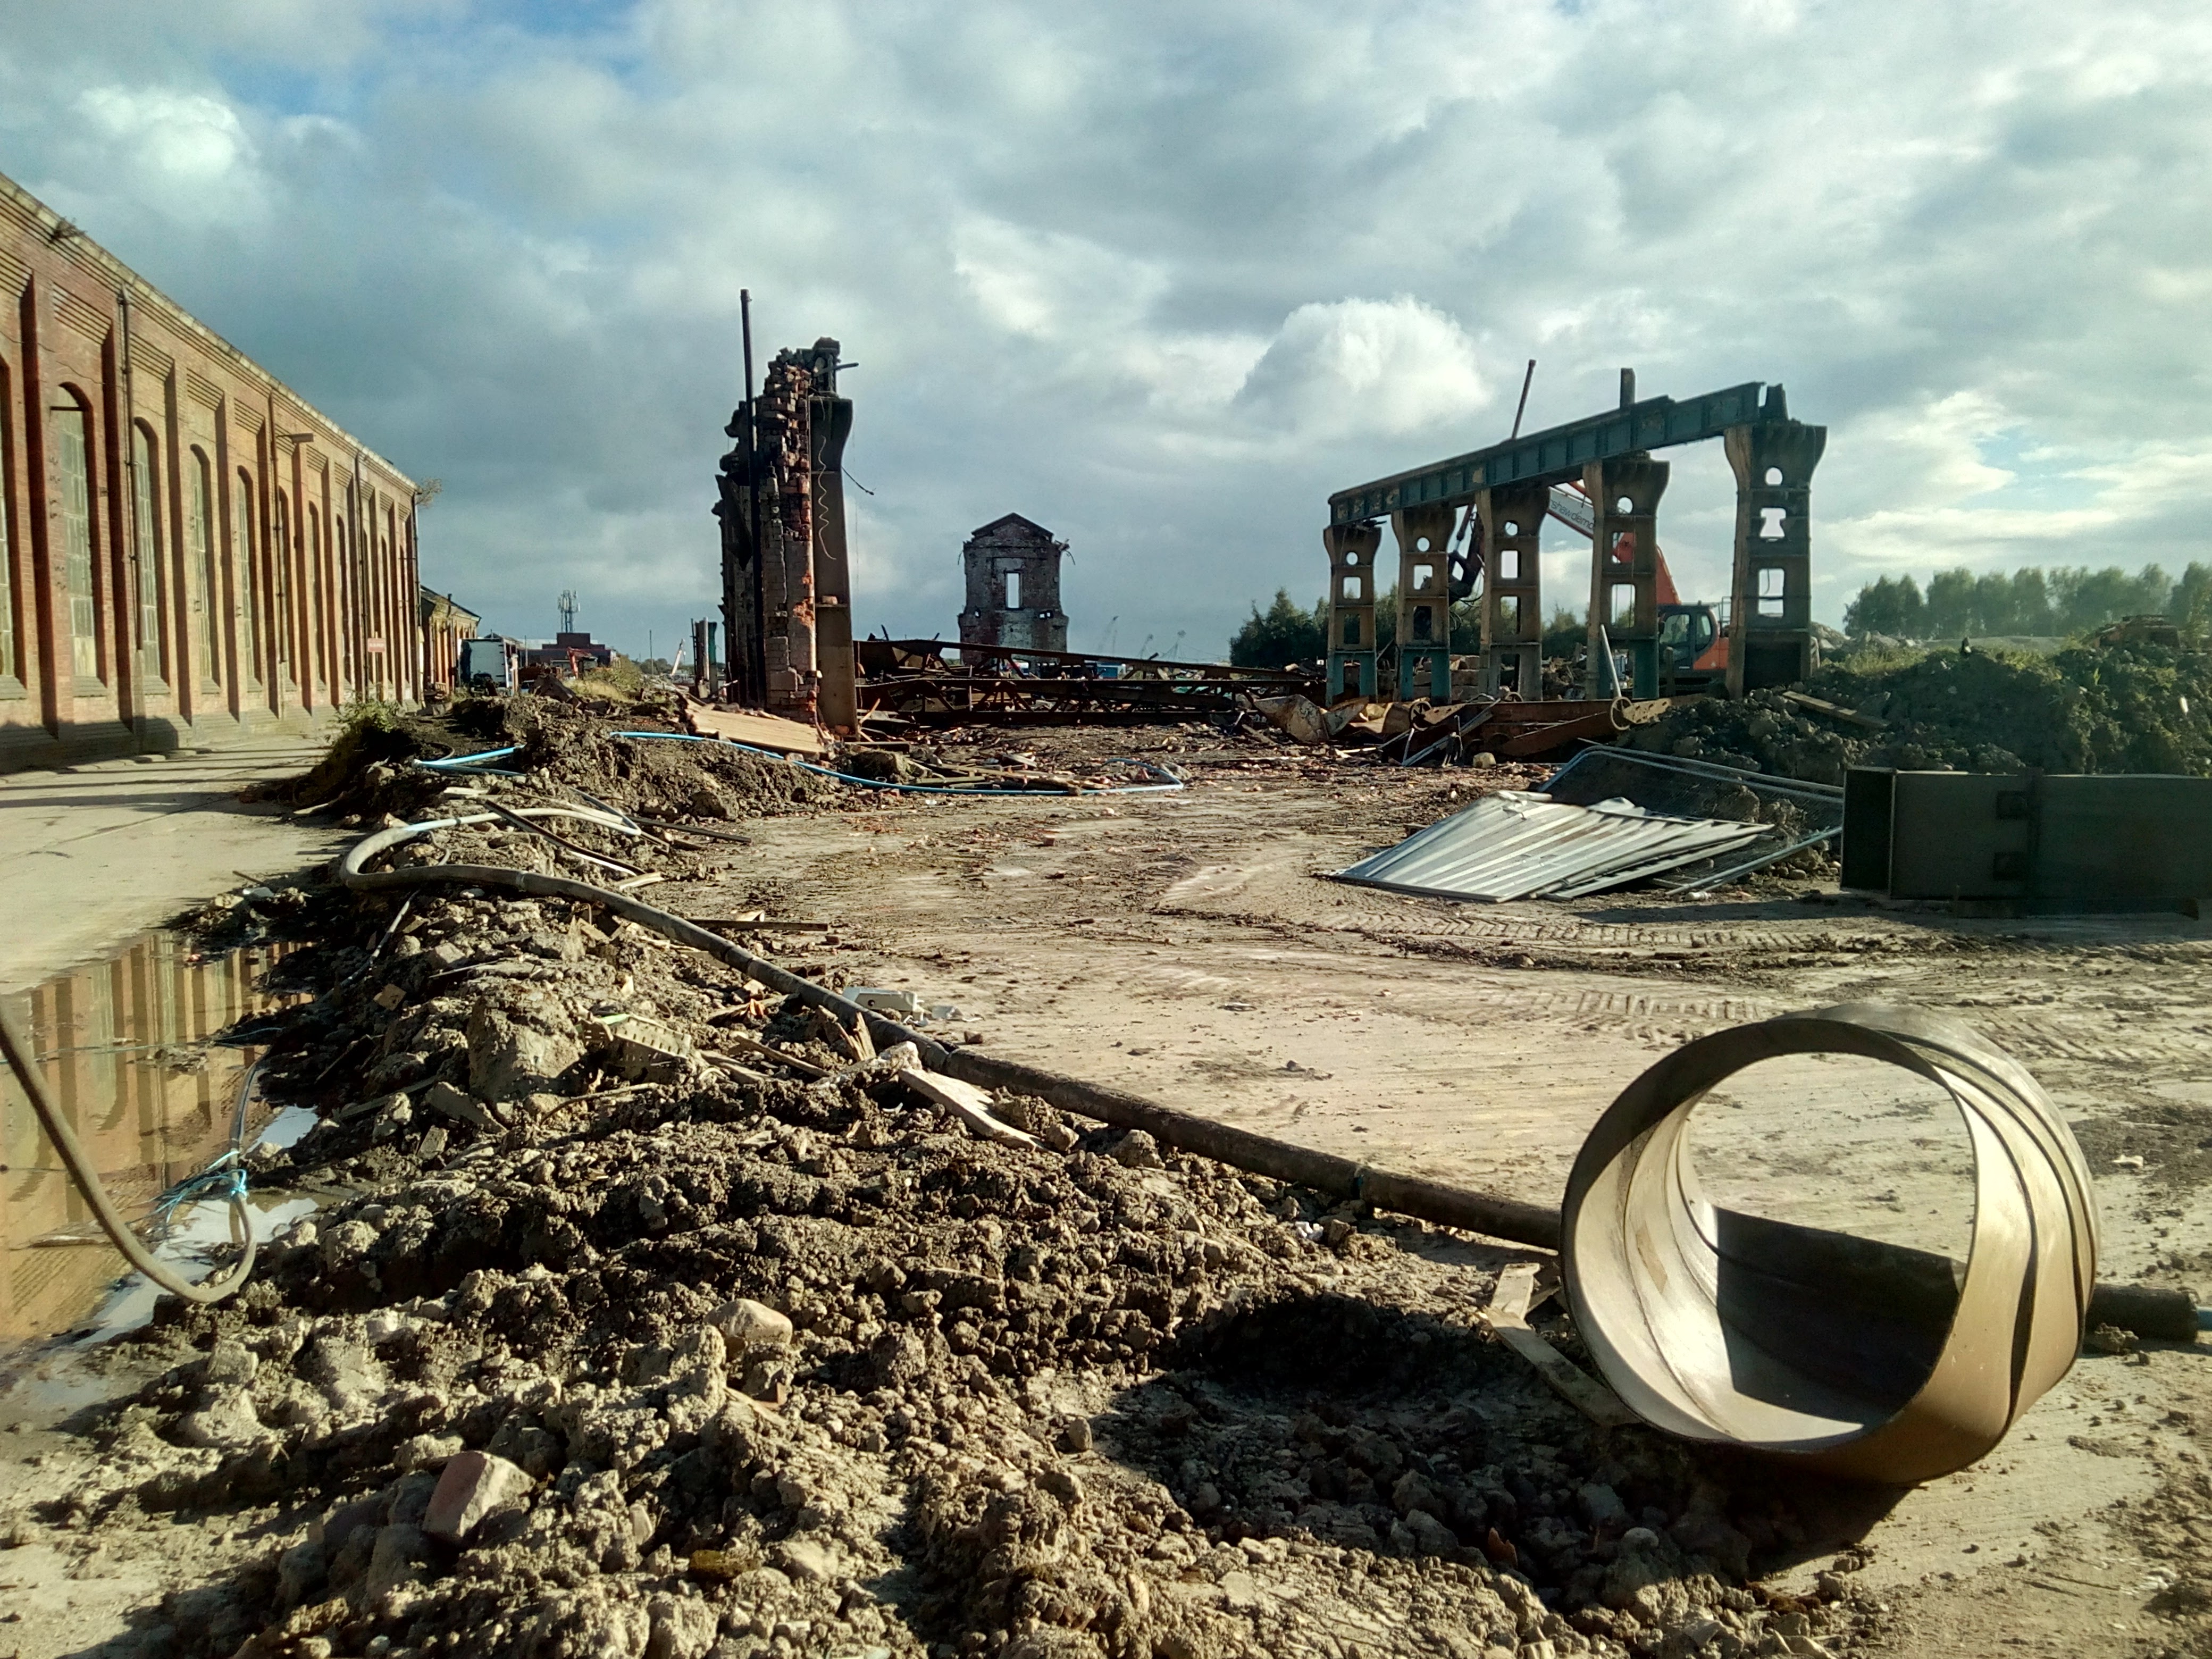 Photograph across the demolition site, along the section of
overhead-crane track. The cranes have been pushed off the end, and now
lie as a heap of twisted metal on the ground. In the distance, the
central pillar of the building looms over the wasteland.